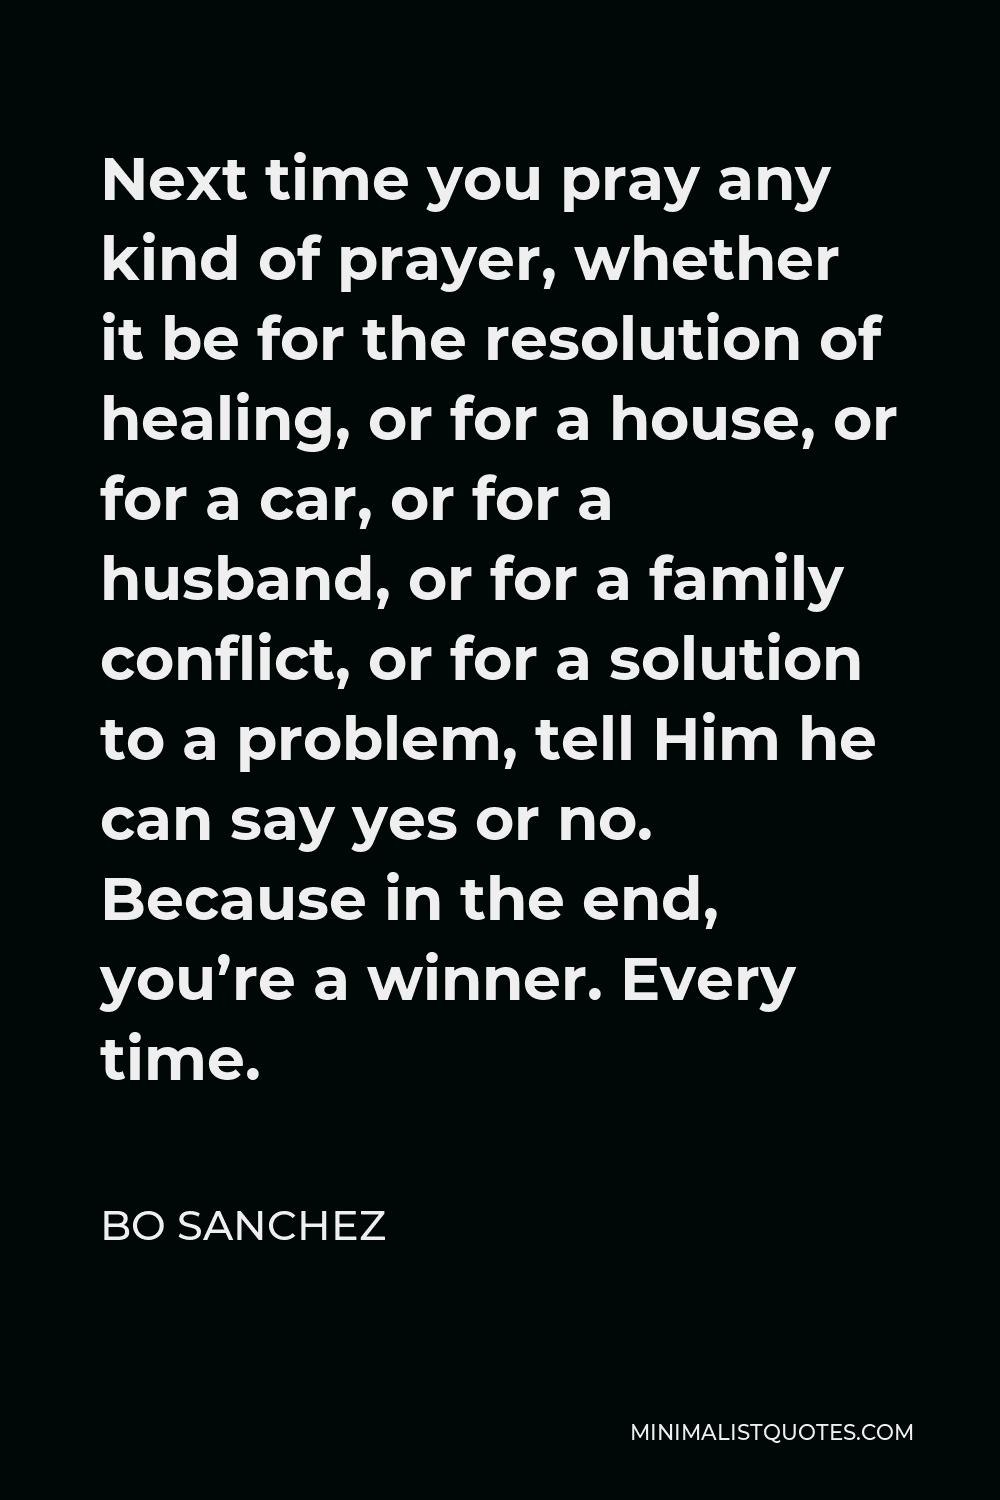 Bo Sanchez Quote - Next time you pray any kind of prayer, whether it be for the resolution of healing, or for a house, or for a car, or for a husband, or for a family conflict, or for a solution to a problem, tell Him he can say yes or no. Because in the end, you’re a winner. Every time.